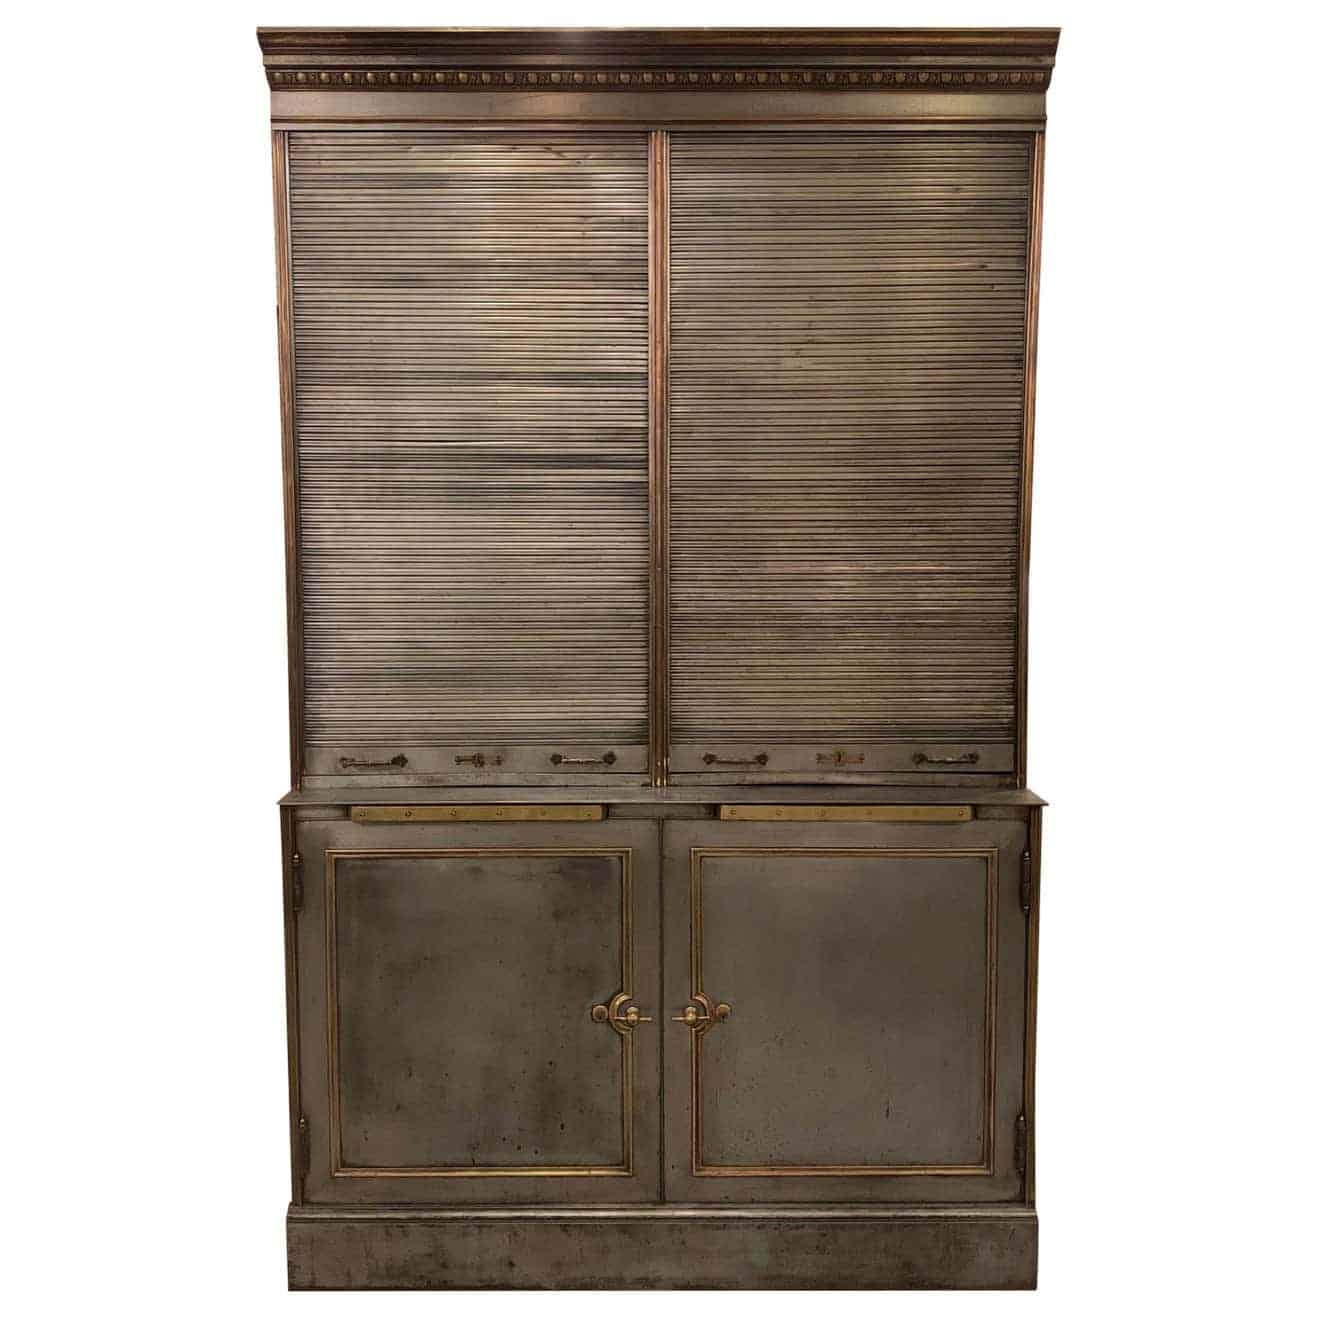 Display cabinet with steel and brass roll-top safe